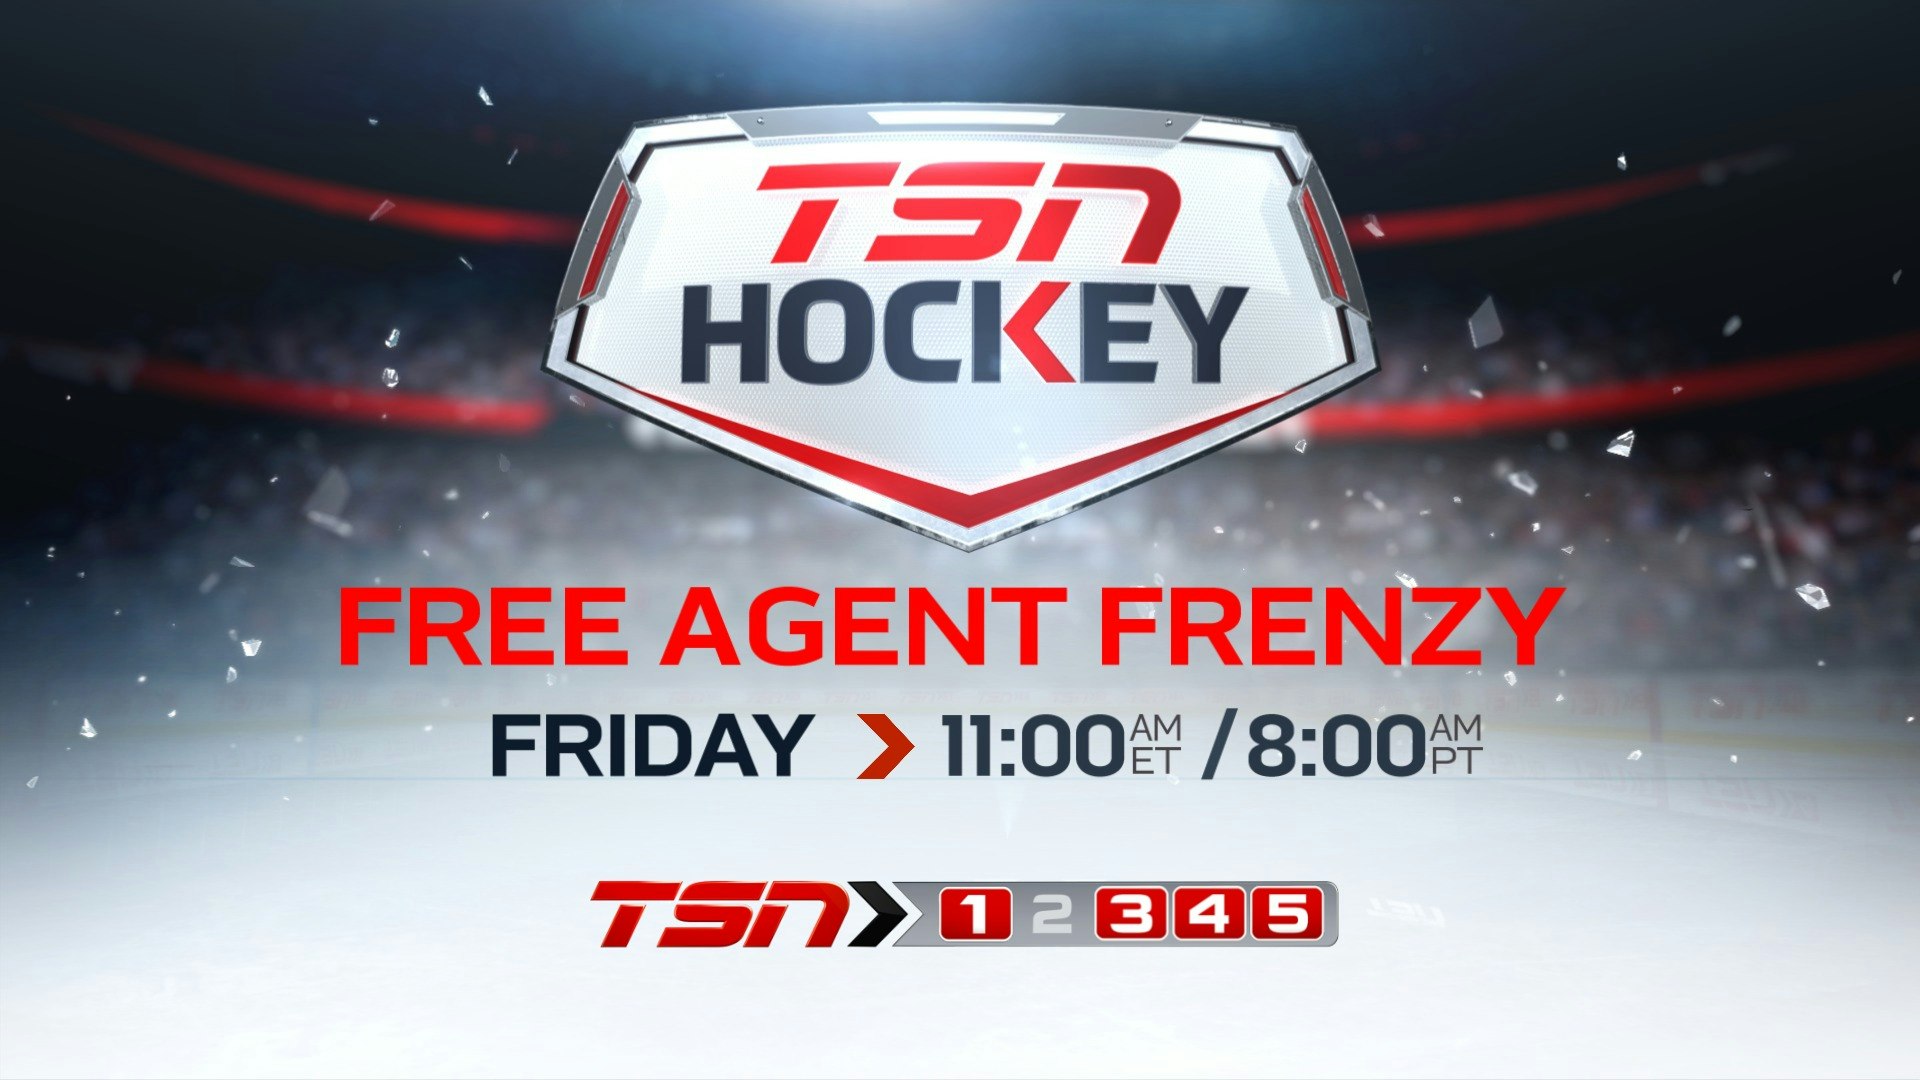 TSNs FREE AGENT FRENZY Delivers Seven Hours of Free Agency Coverage on Canada Day